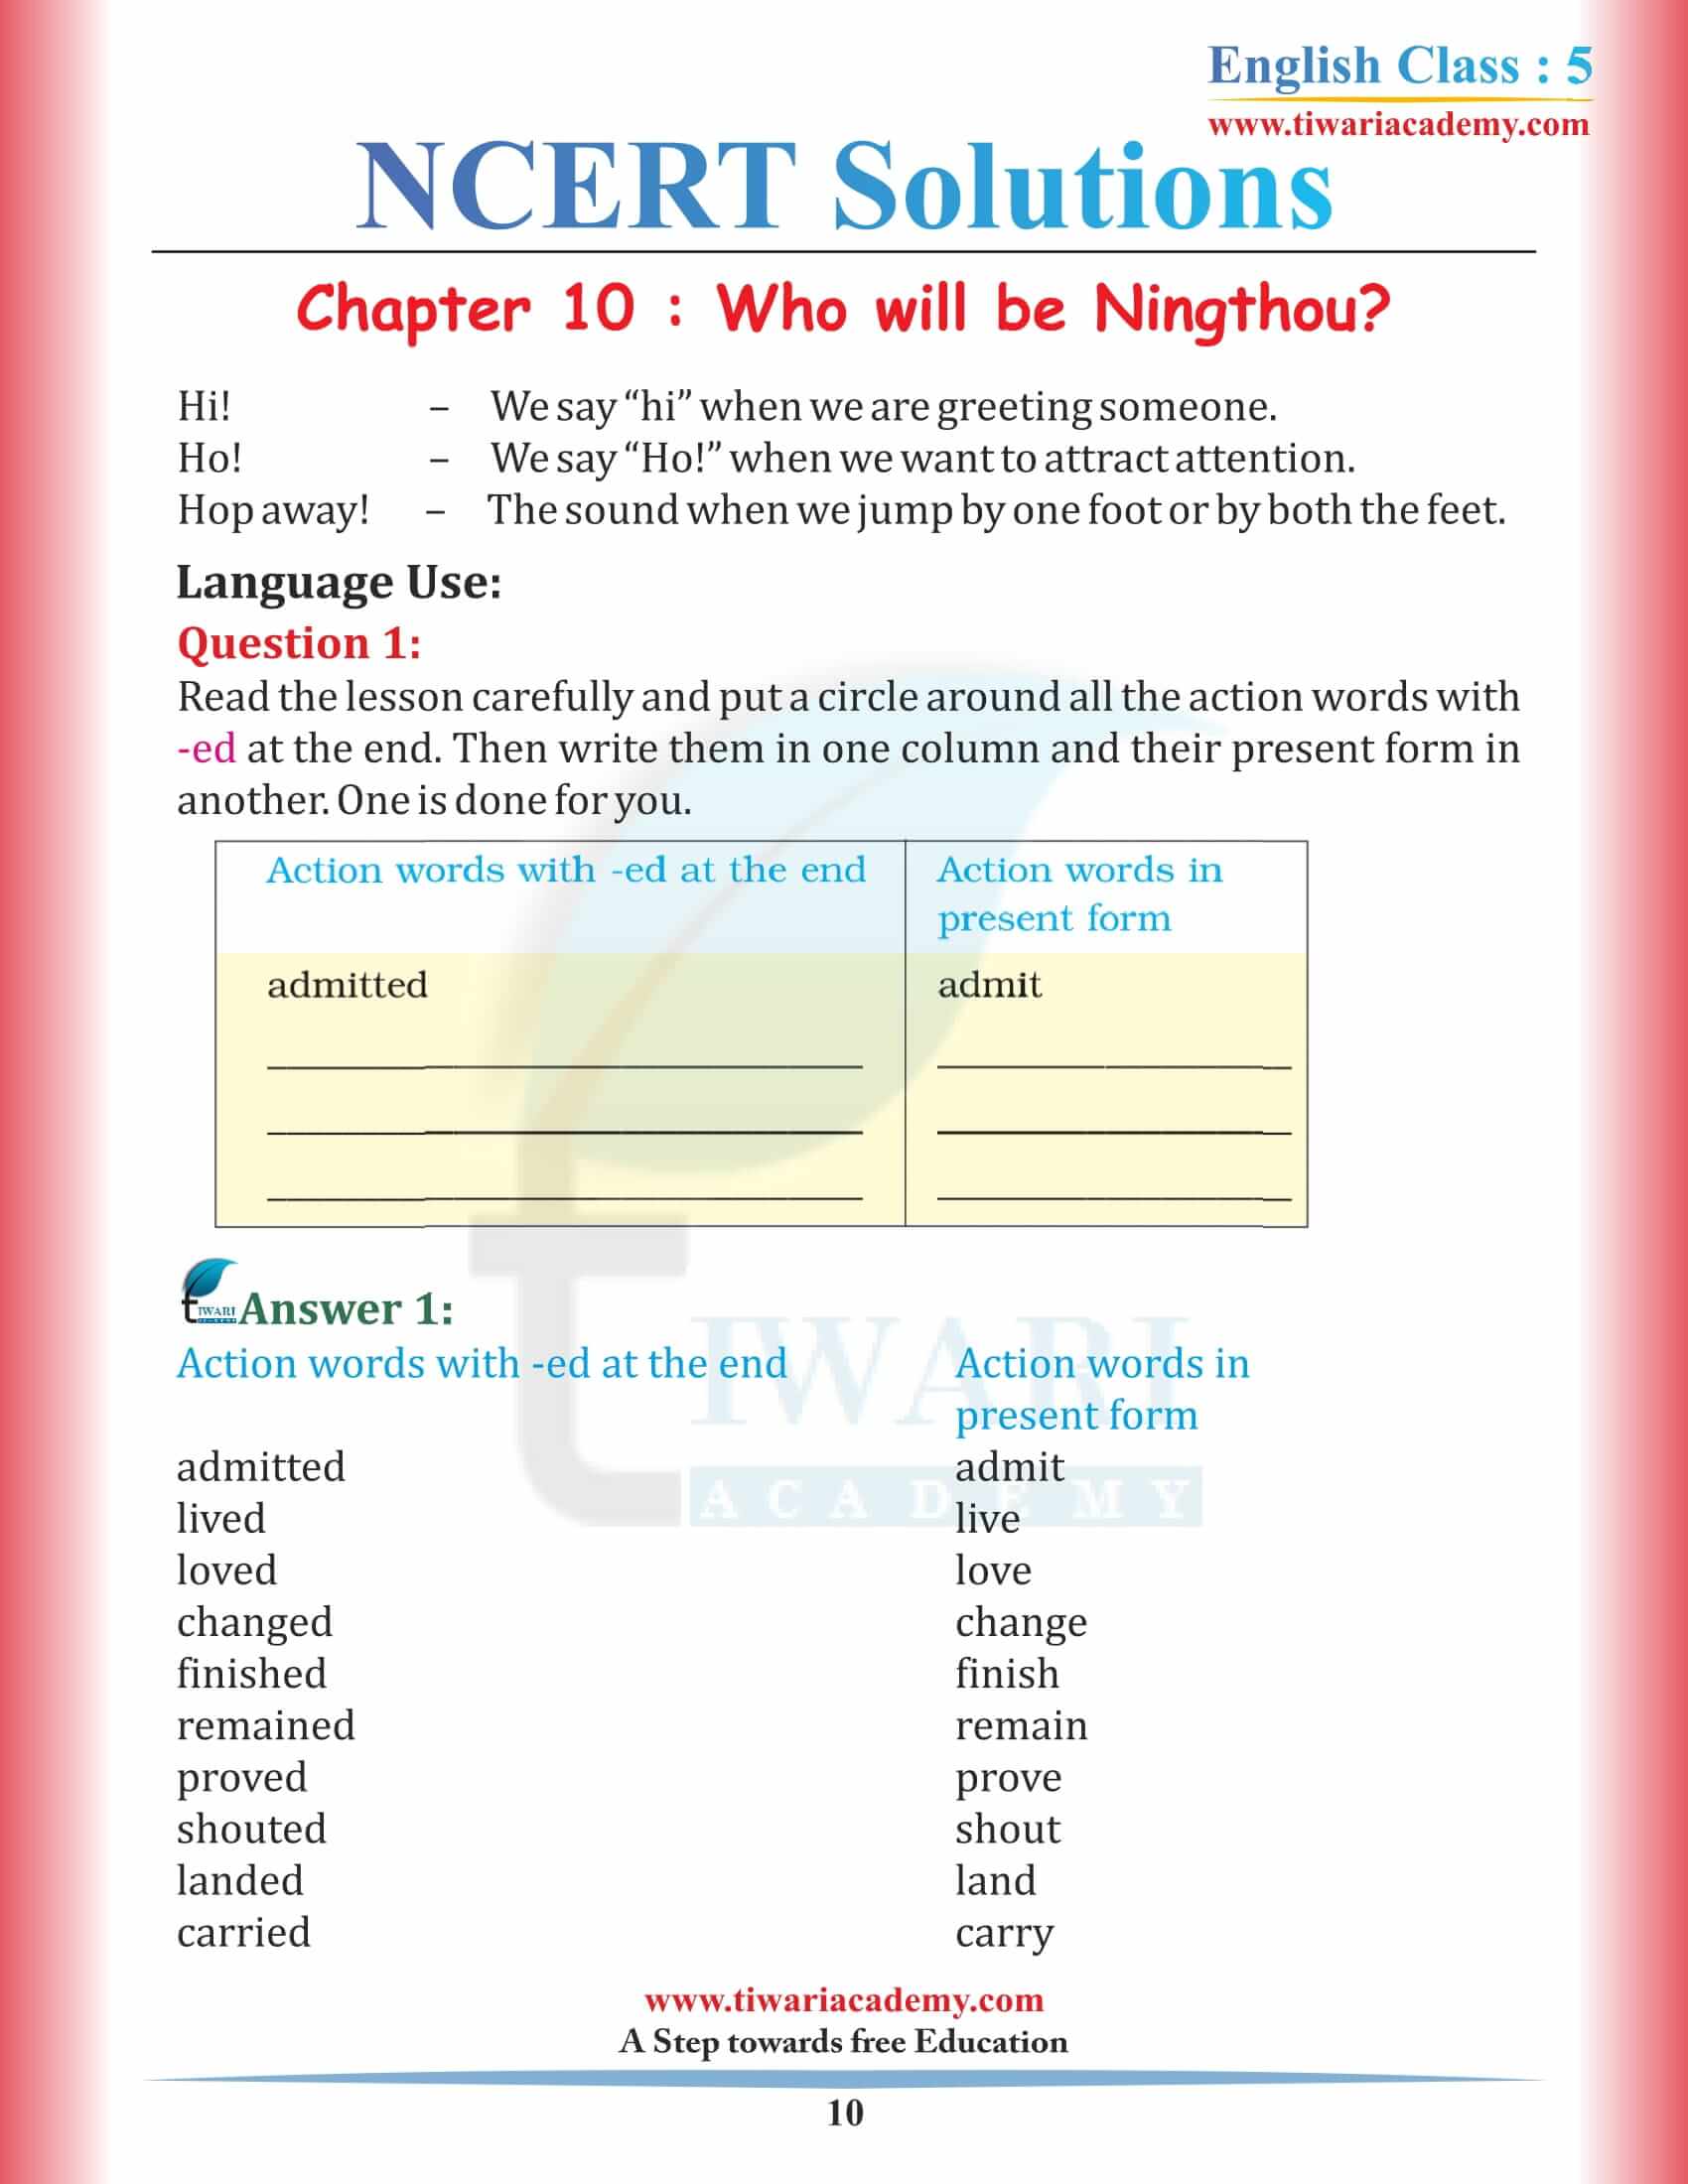 NCERT Solutions for Class 5 English Chapter 10